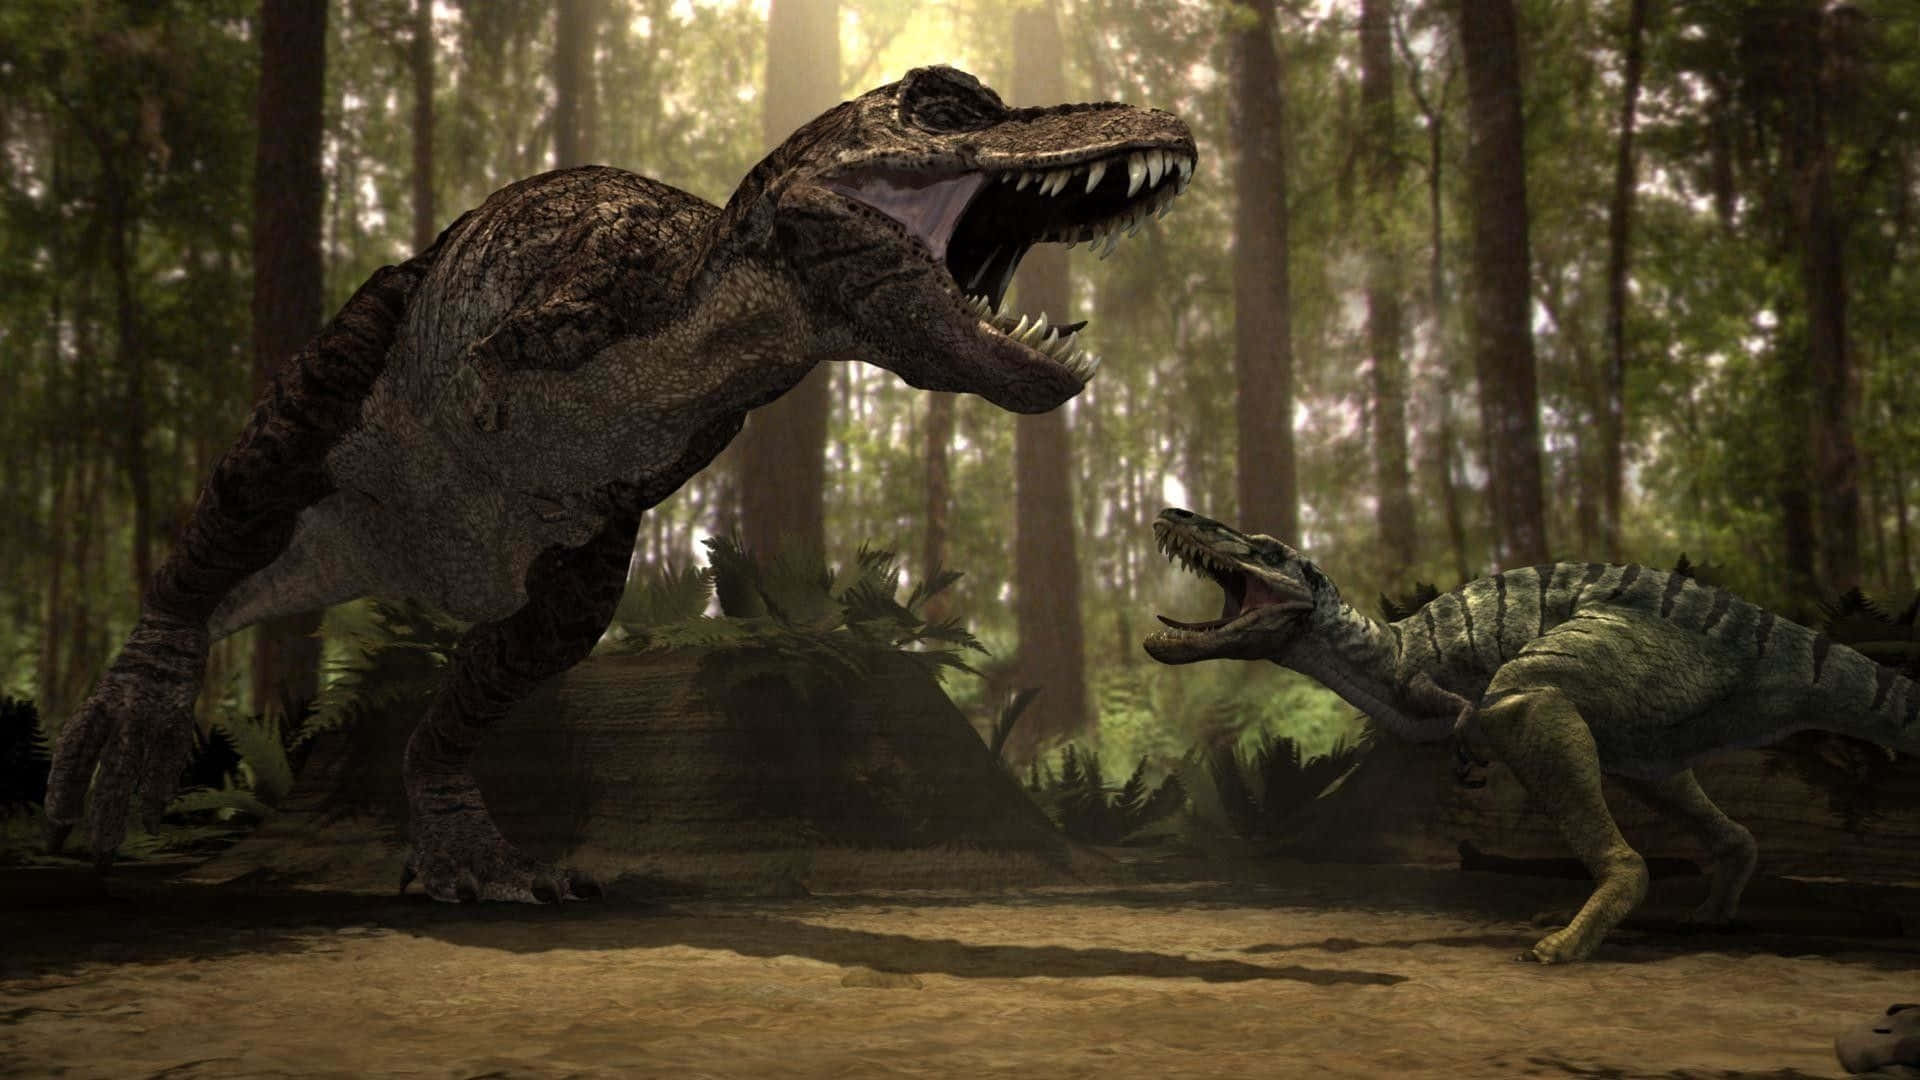 A stunning visual of a black dinosaur taking a walk in the forest Wallpaper